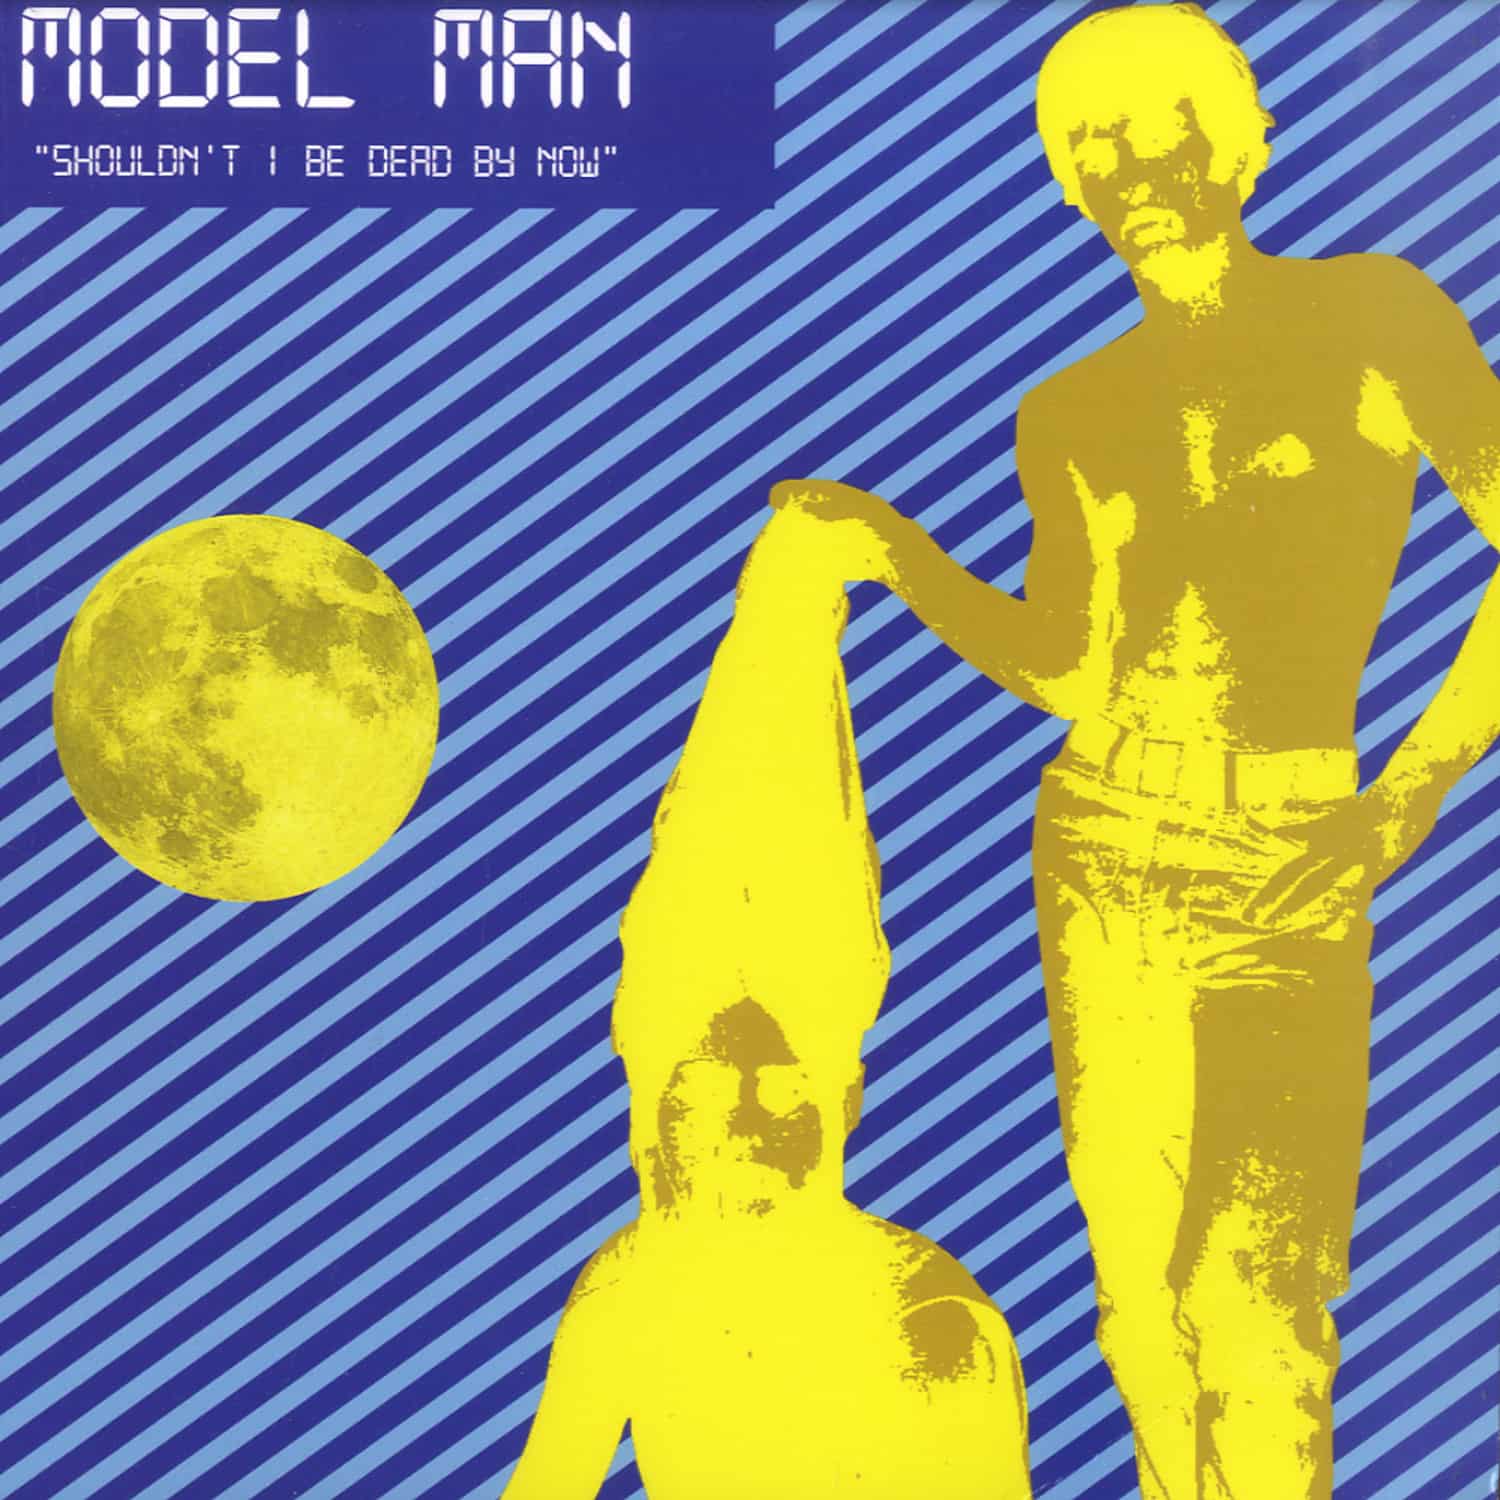 Model Man - SHOULDNT I BE DEAD BY NOW